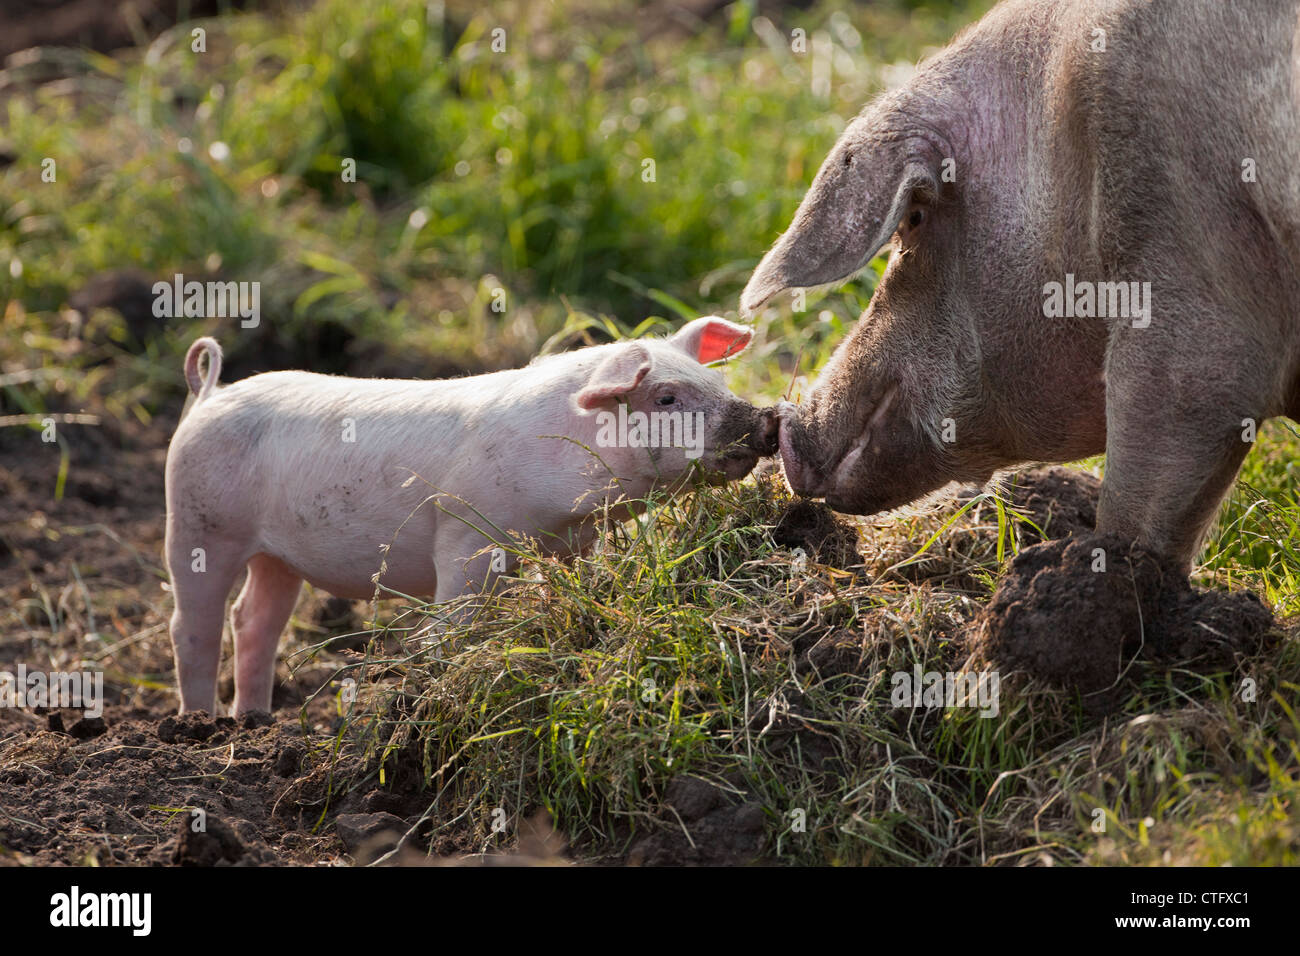 The Netherlands, Kortenhoef, Pigs. Sow and piglet. Stock Photo